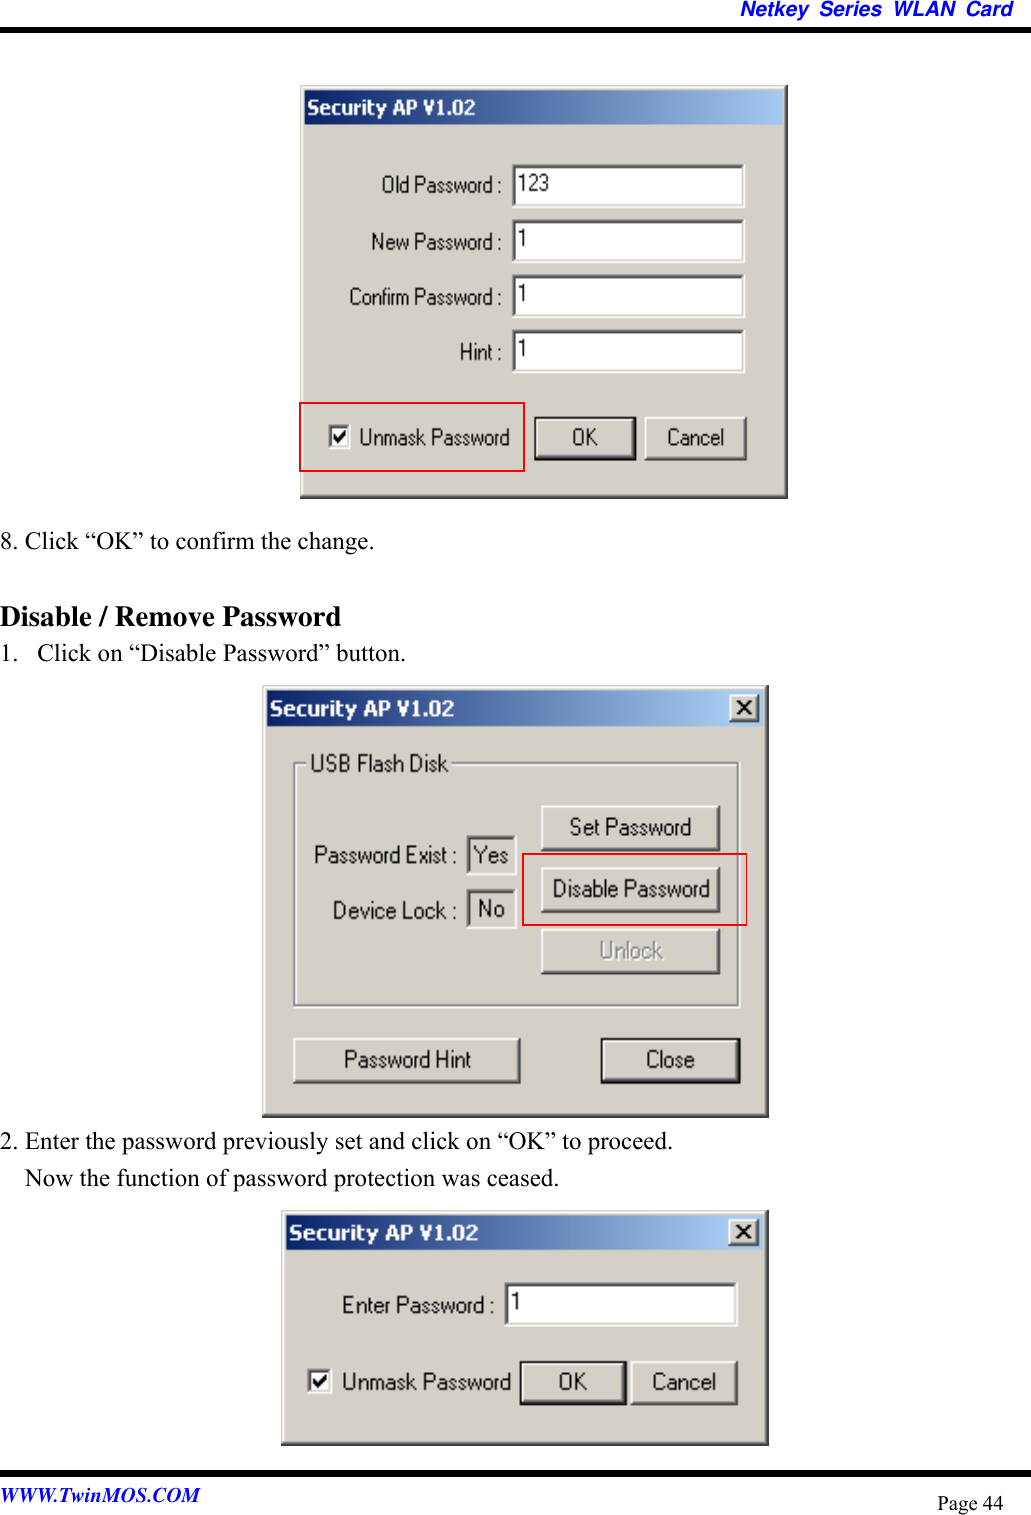   Netkey Series WLAN Card              8. Click “OK” to confirm the change.  Disable / Remove Password 1.  Click on “Disable Password” button.             2. Enter the password previously set and click on “OK” to proceed. Now the function of password protection was ceased.        WWW.TwinMOS.COM  Page 44